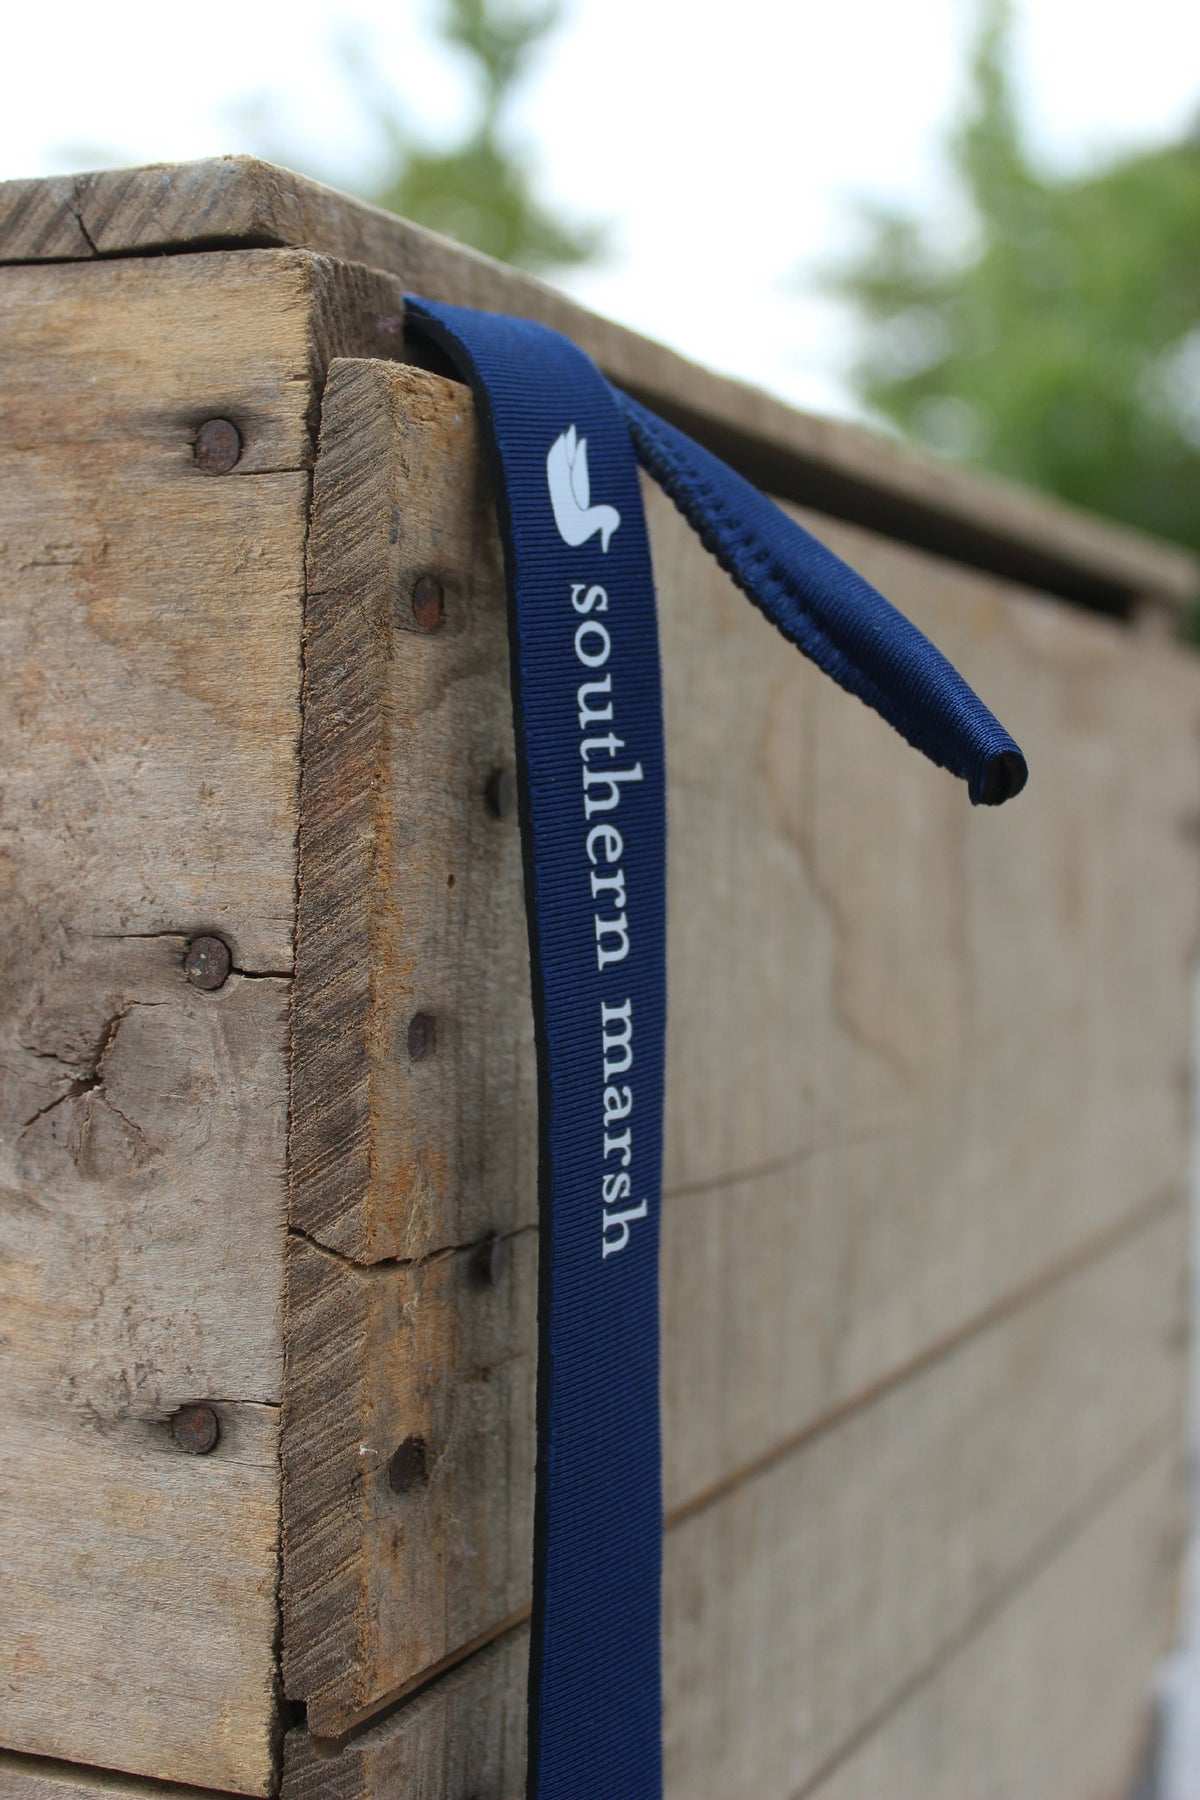 Southern Marsh: Solid Sunglass Strap, Navy